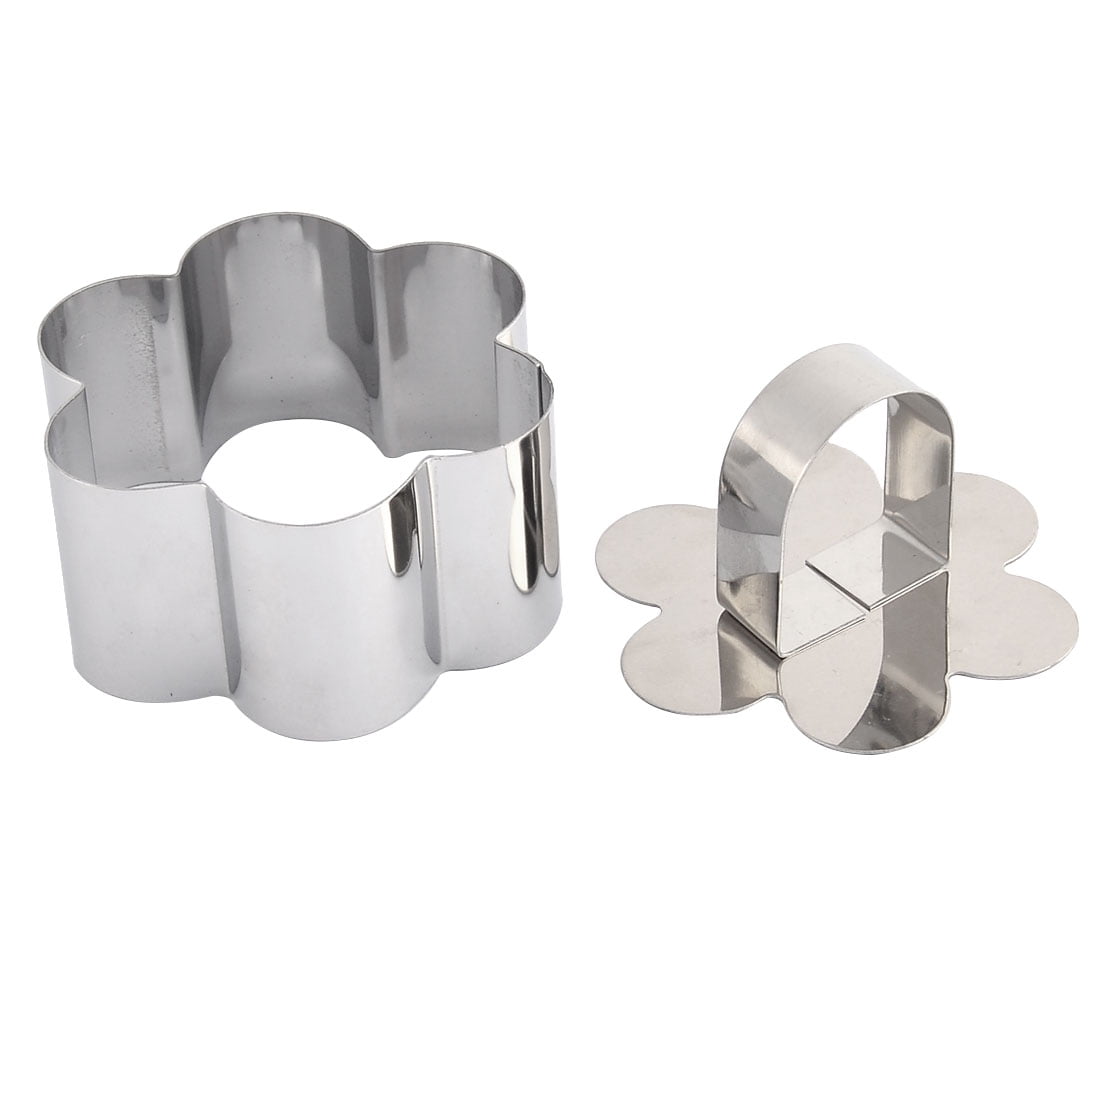 Details about   Bakery Octagon Shape DIY Cookie Biscuit Cake Maker Cutter Mold Silver Tone 2pcs 